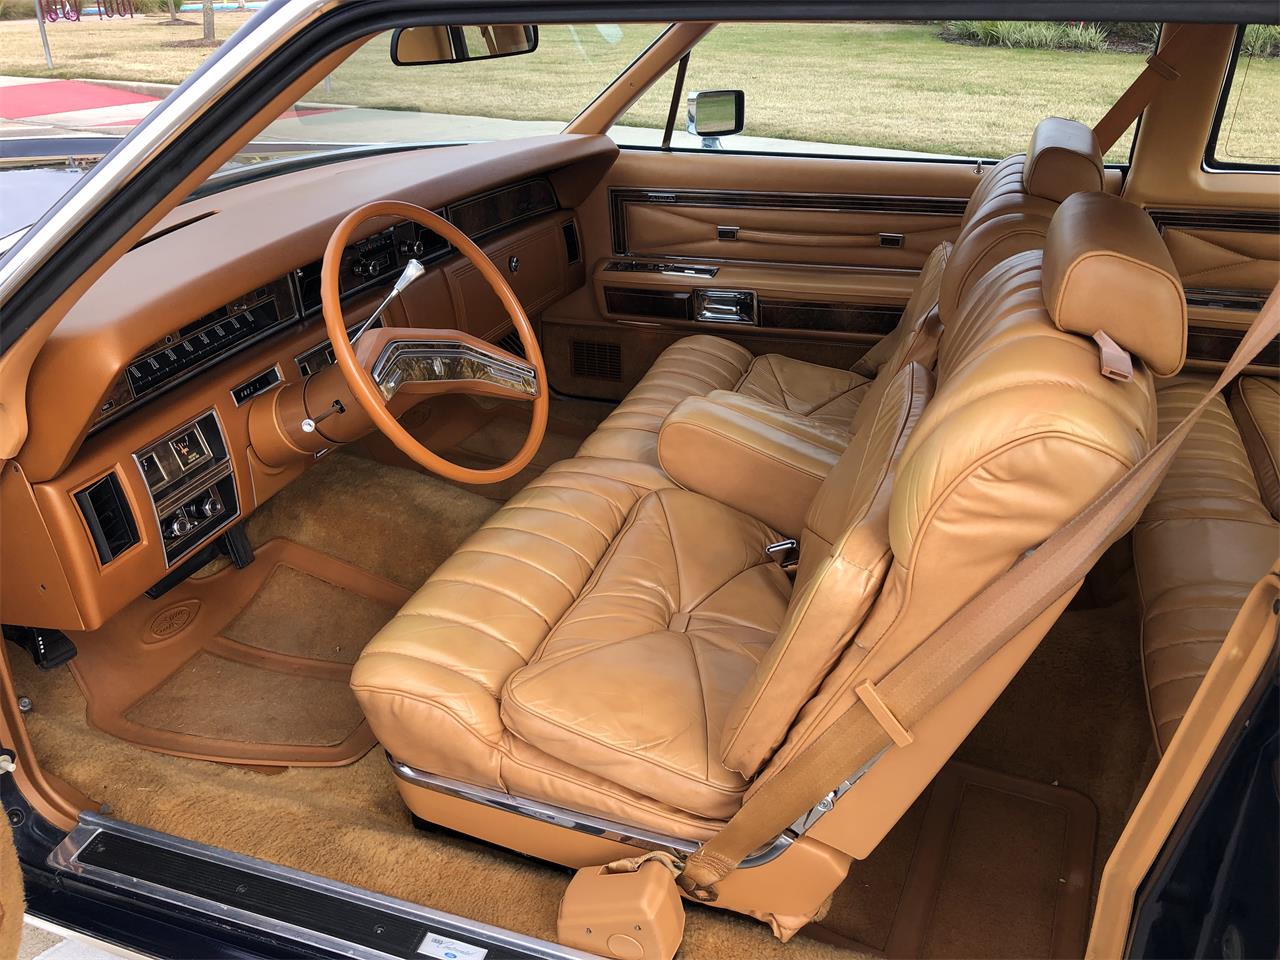 1977 Lincoln Continental for sale in Houston, TX – photo 10